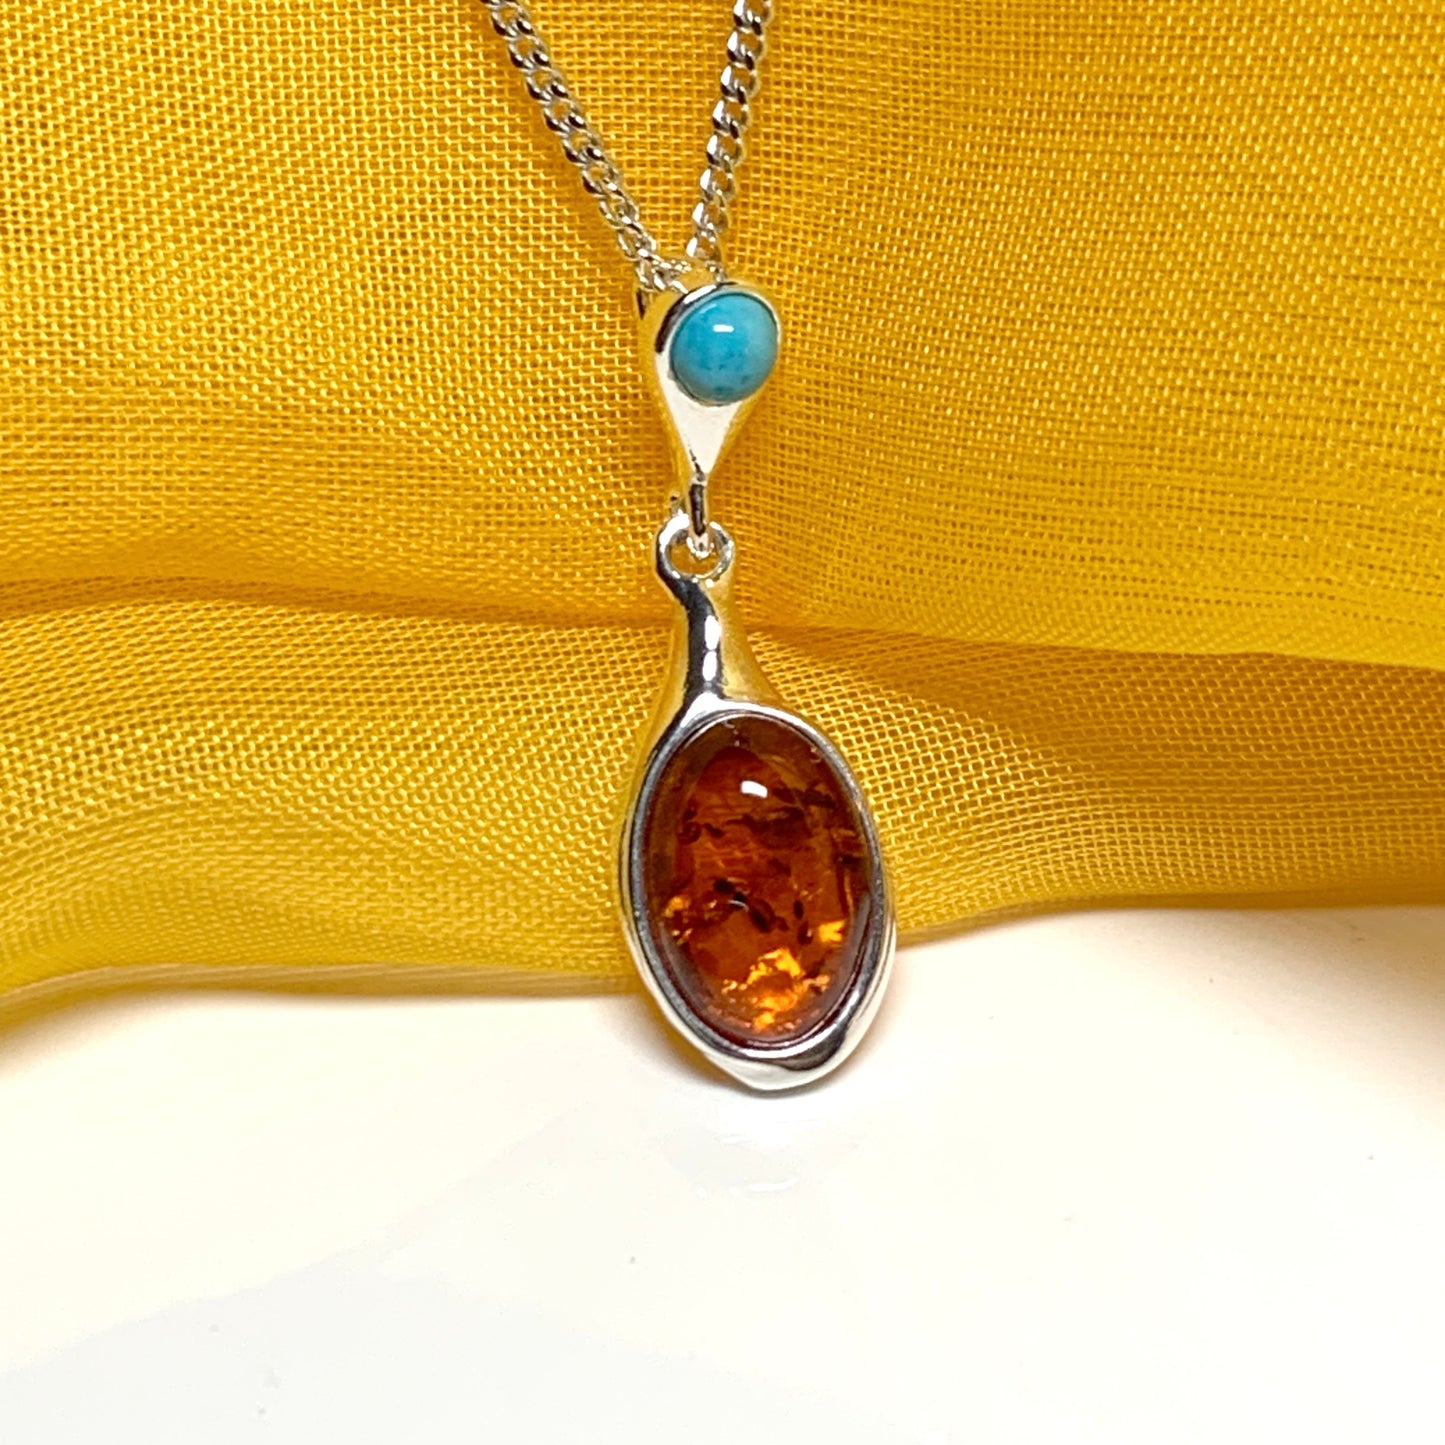 Real amber and turquoise necklace sterling silver pendant